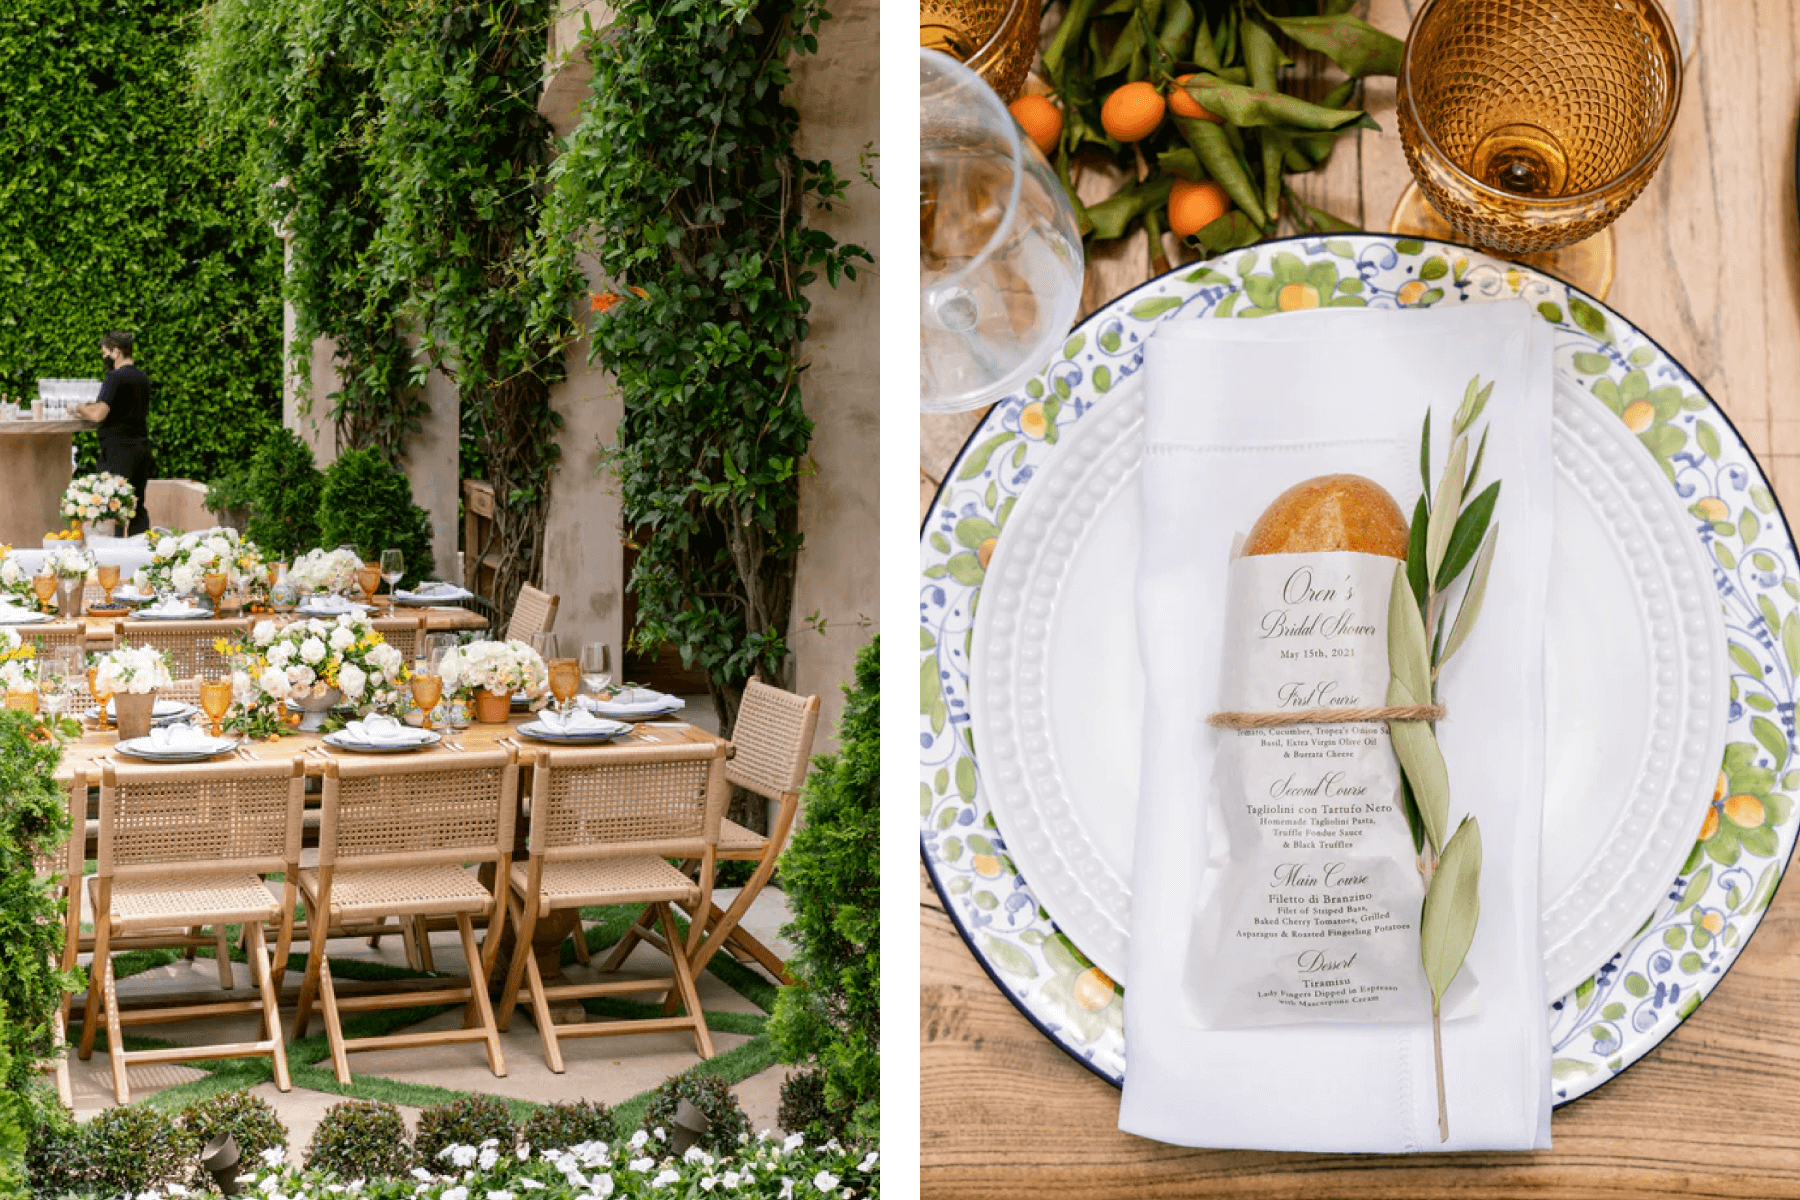 Rattan chairs and banquet tables at a greenery-filled outdoor space; a place setting with citrus details and a dinner roll in a sleeve with a menu on it and olive branch